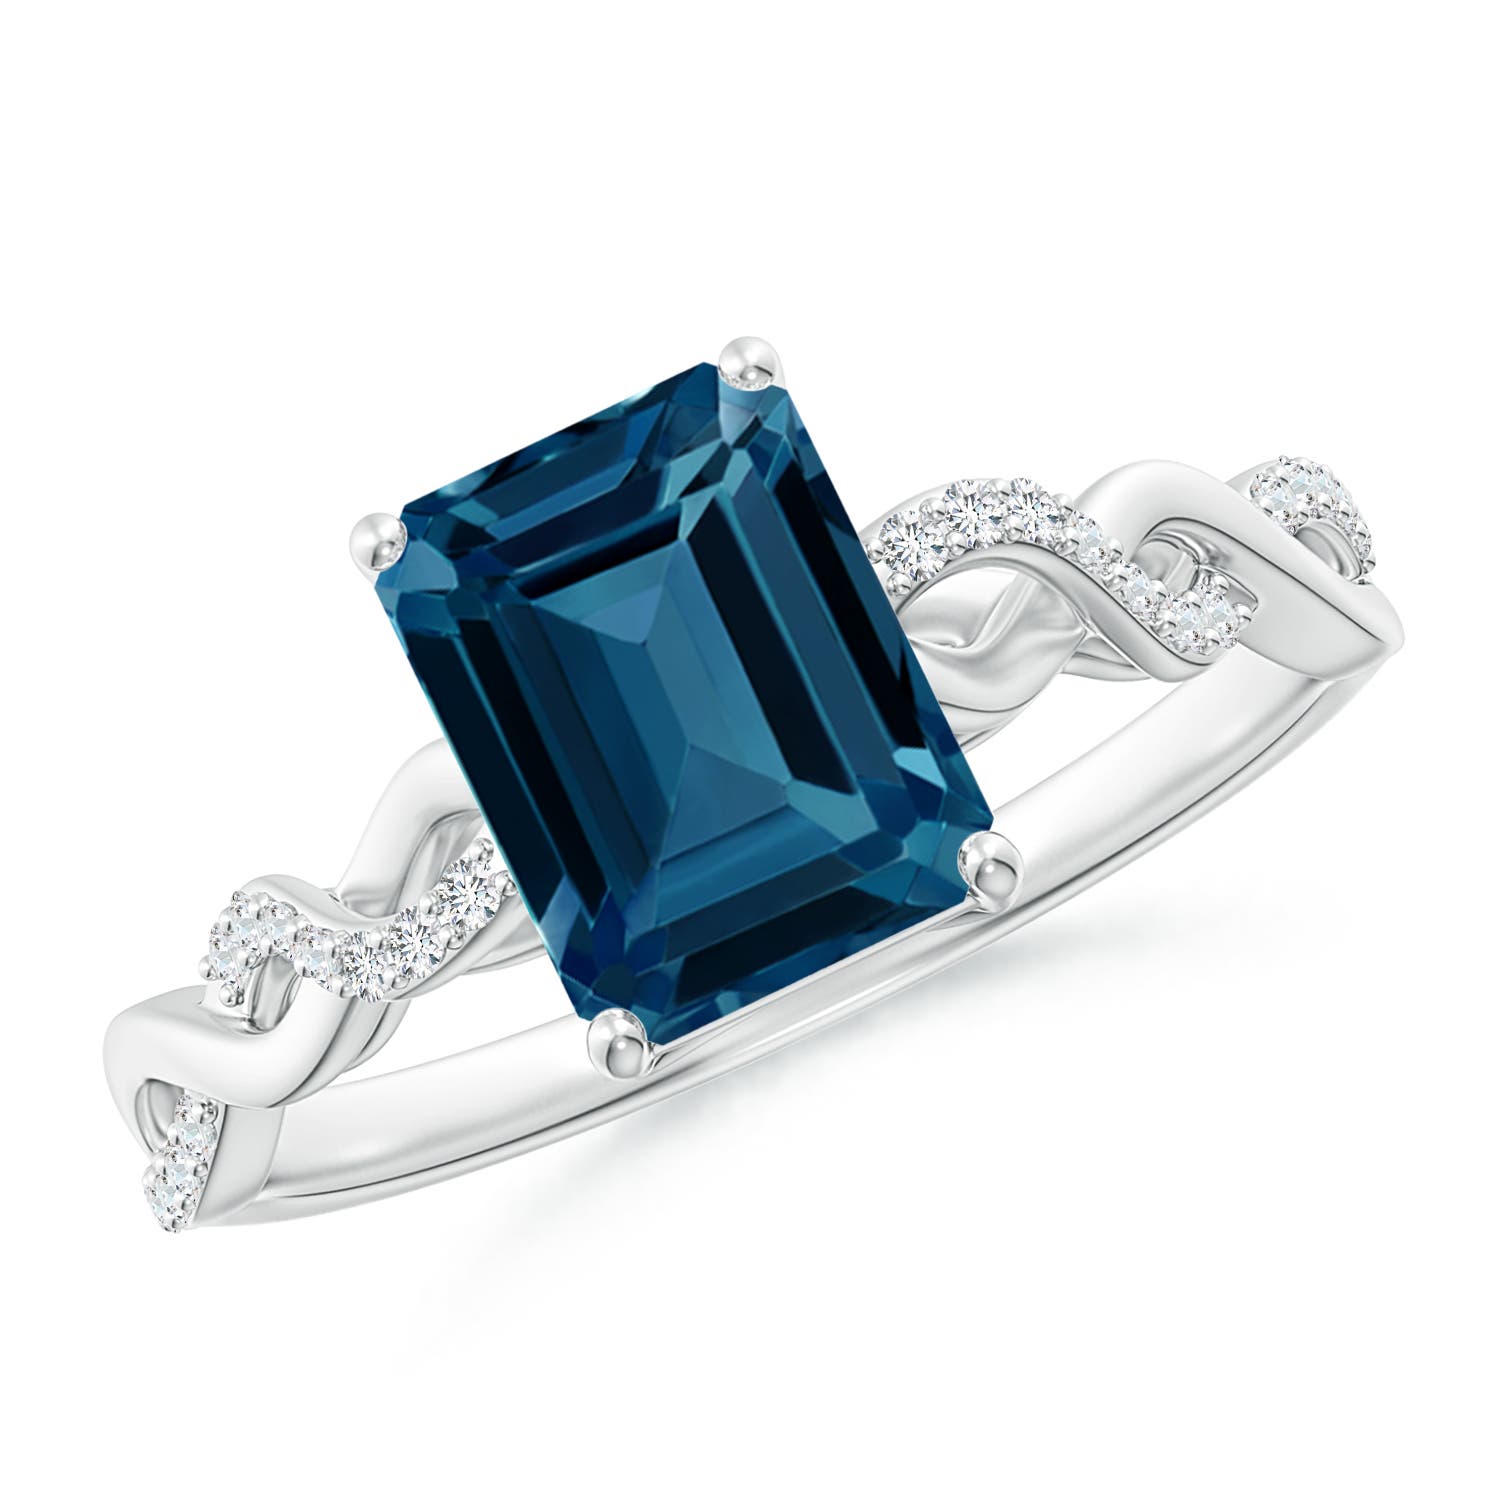 Blue Topaz Engagement Ring: The Complete Guide 2023